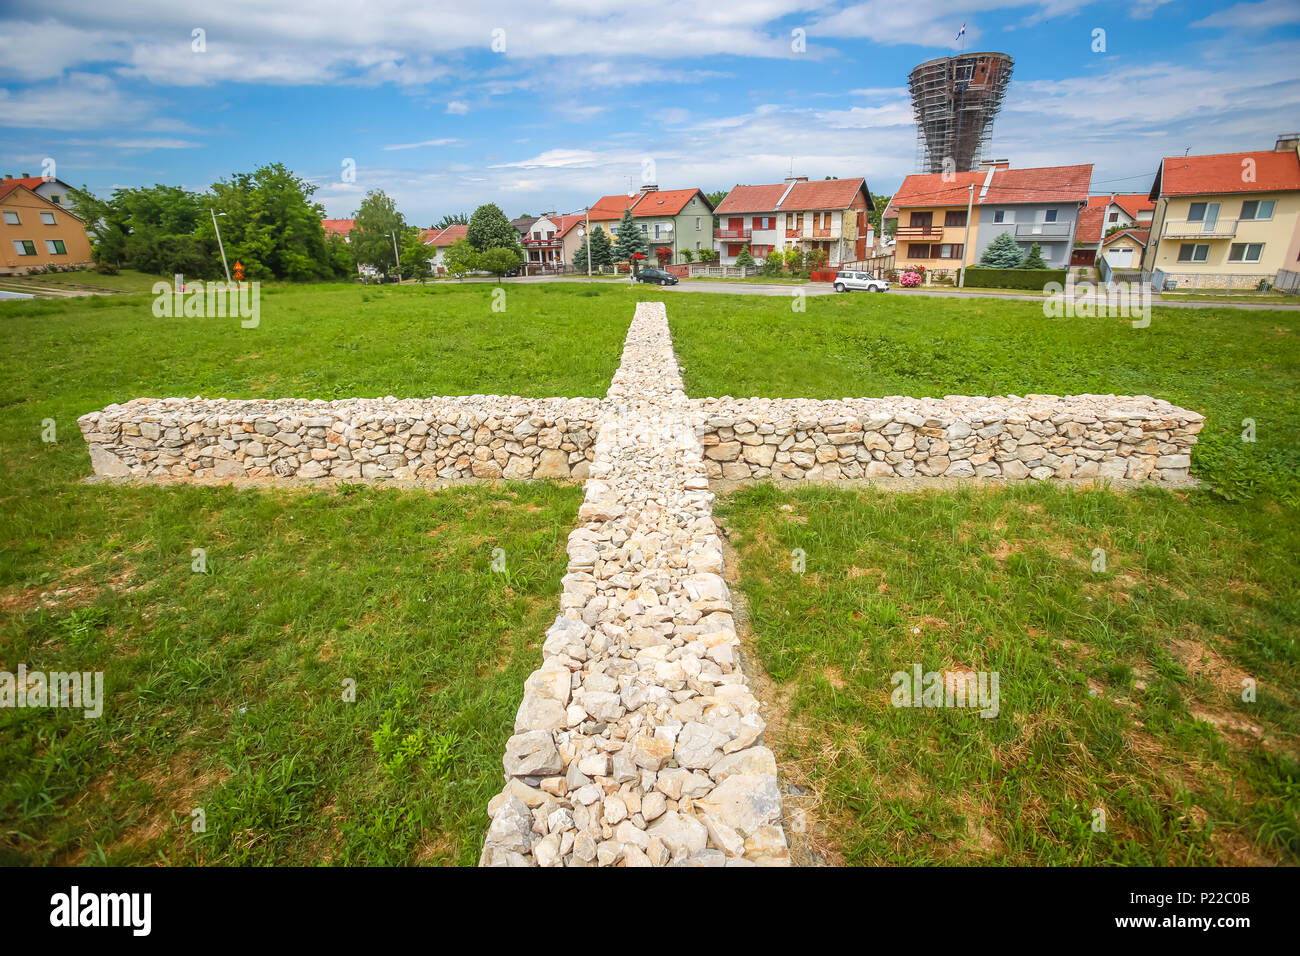 A view of the votive stone cross as a symbol of the sacrifice and suffering of the city during the Independence war with the Vukovar water tower in th Stock Photo